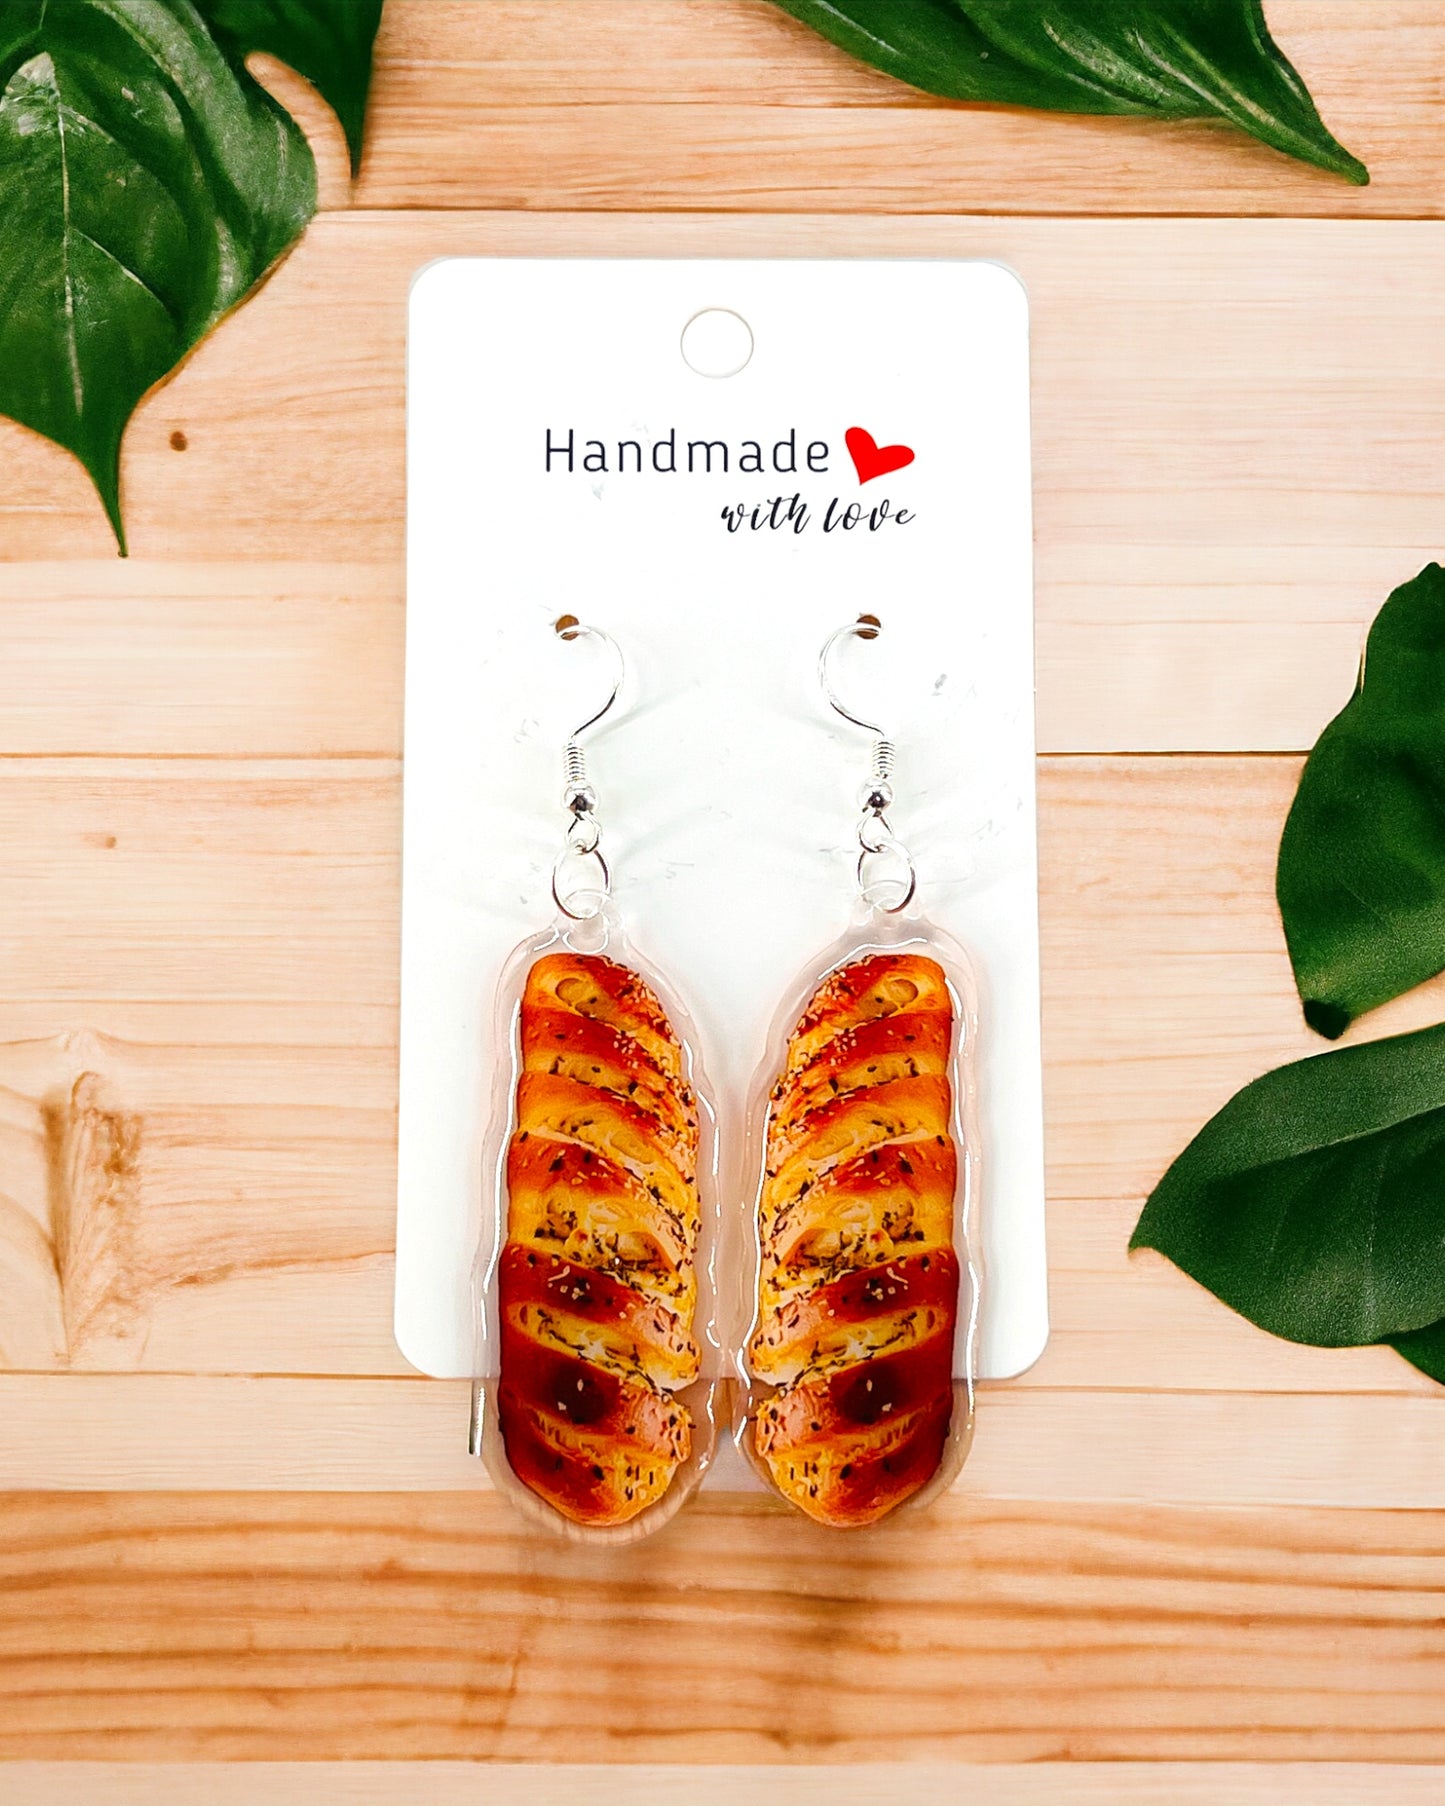 Garlic Bread Bakers Food lovers Acrylic earrings, funky weird quirky earrings, cool funny  gift for her, birthday gift,  Christmas stocking stuffer